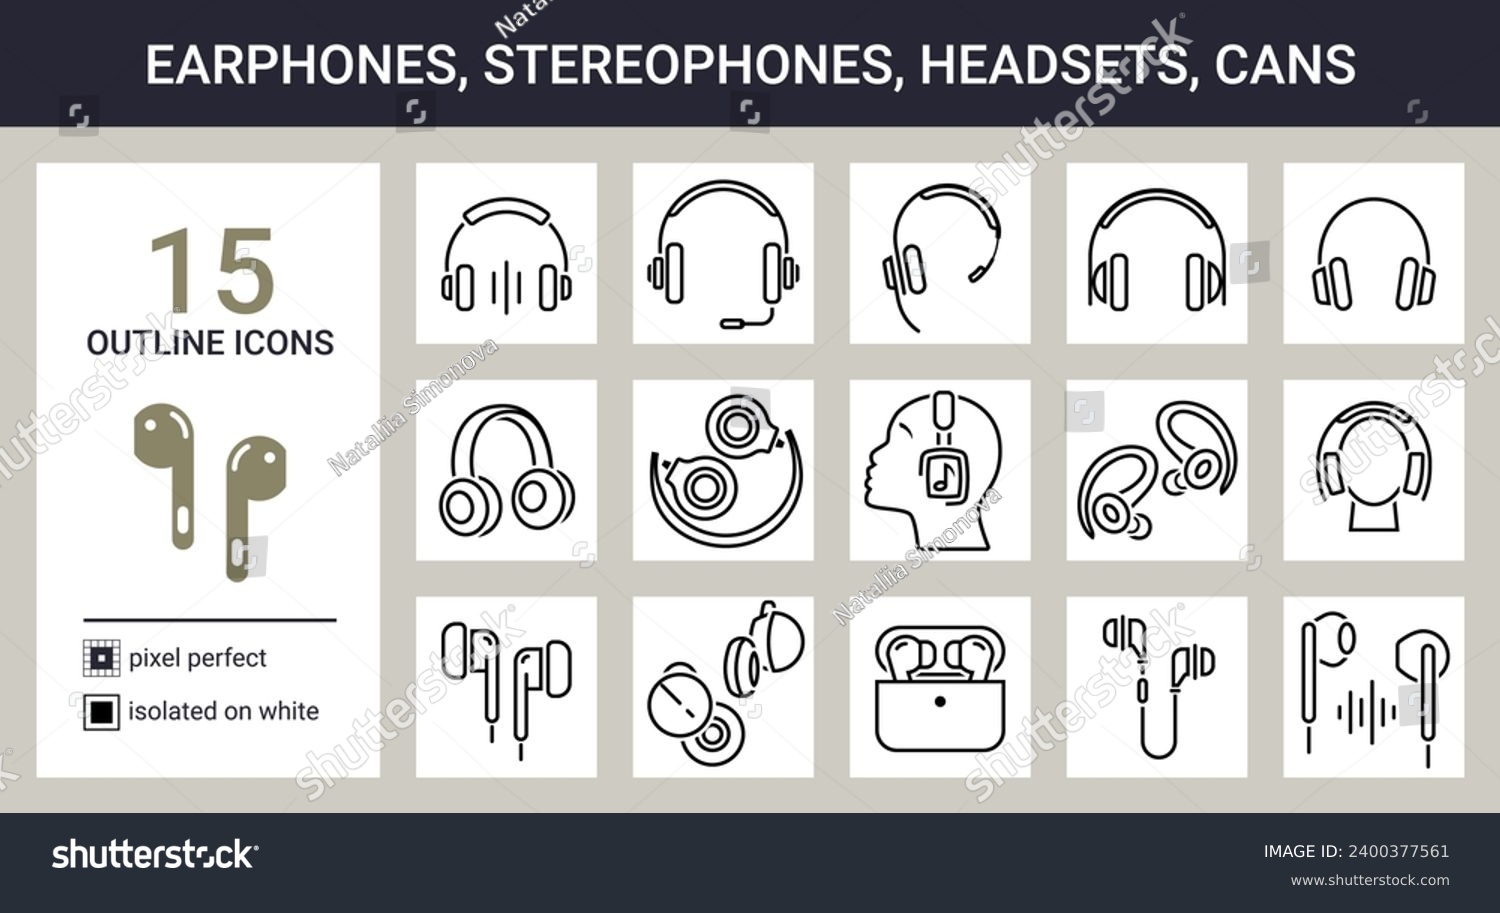 SVG of Big set of outline icons on white background. Earphones, in-ear headphones, stereo phones, headsets, cans etc. Pixel perfect. svg